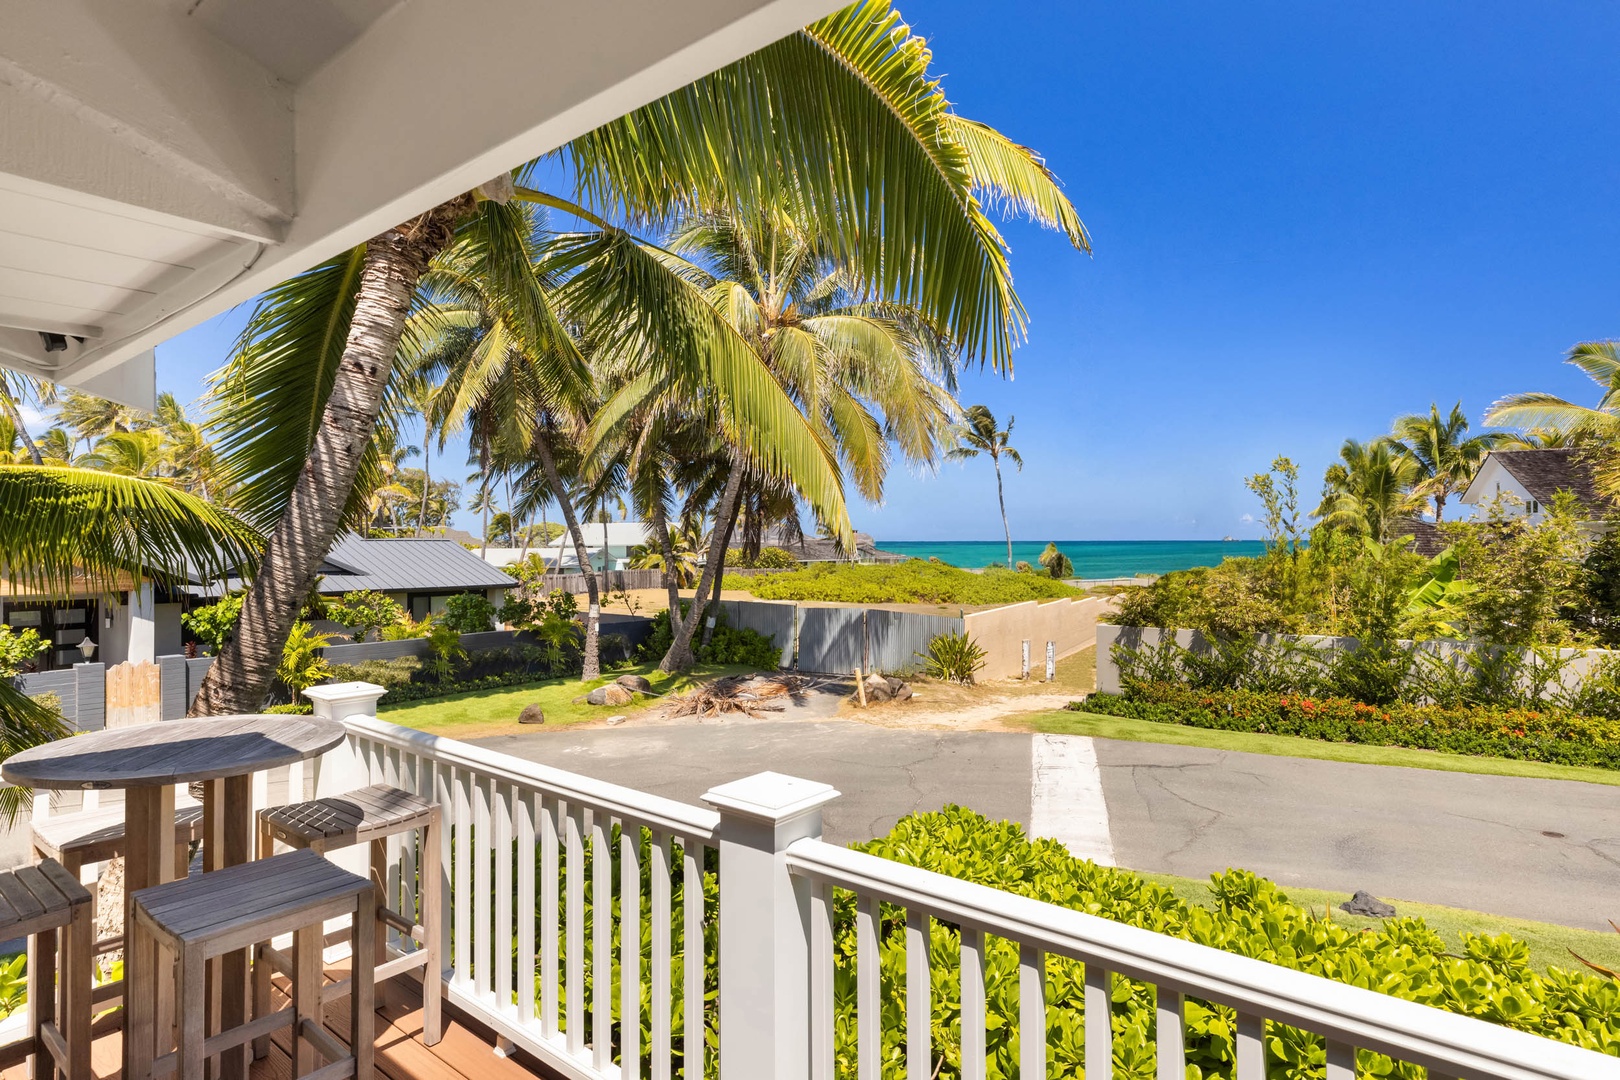 Kailua Vacation Rentals, Ranch Beach Estate - Expansive wrap-around deck for panoramic relaxation.